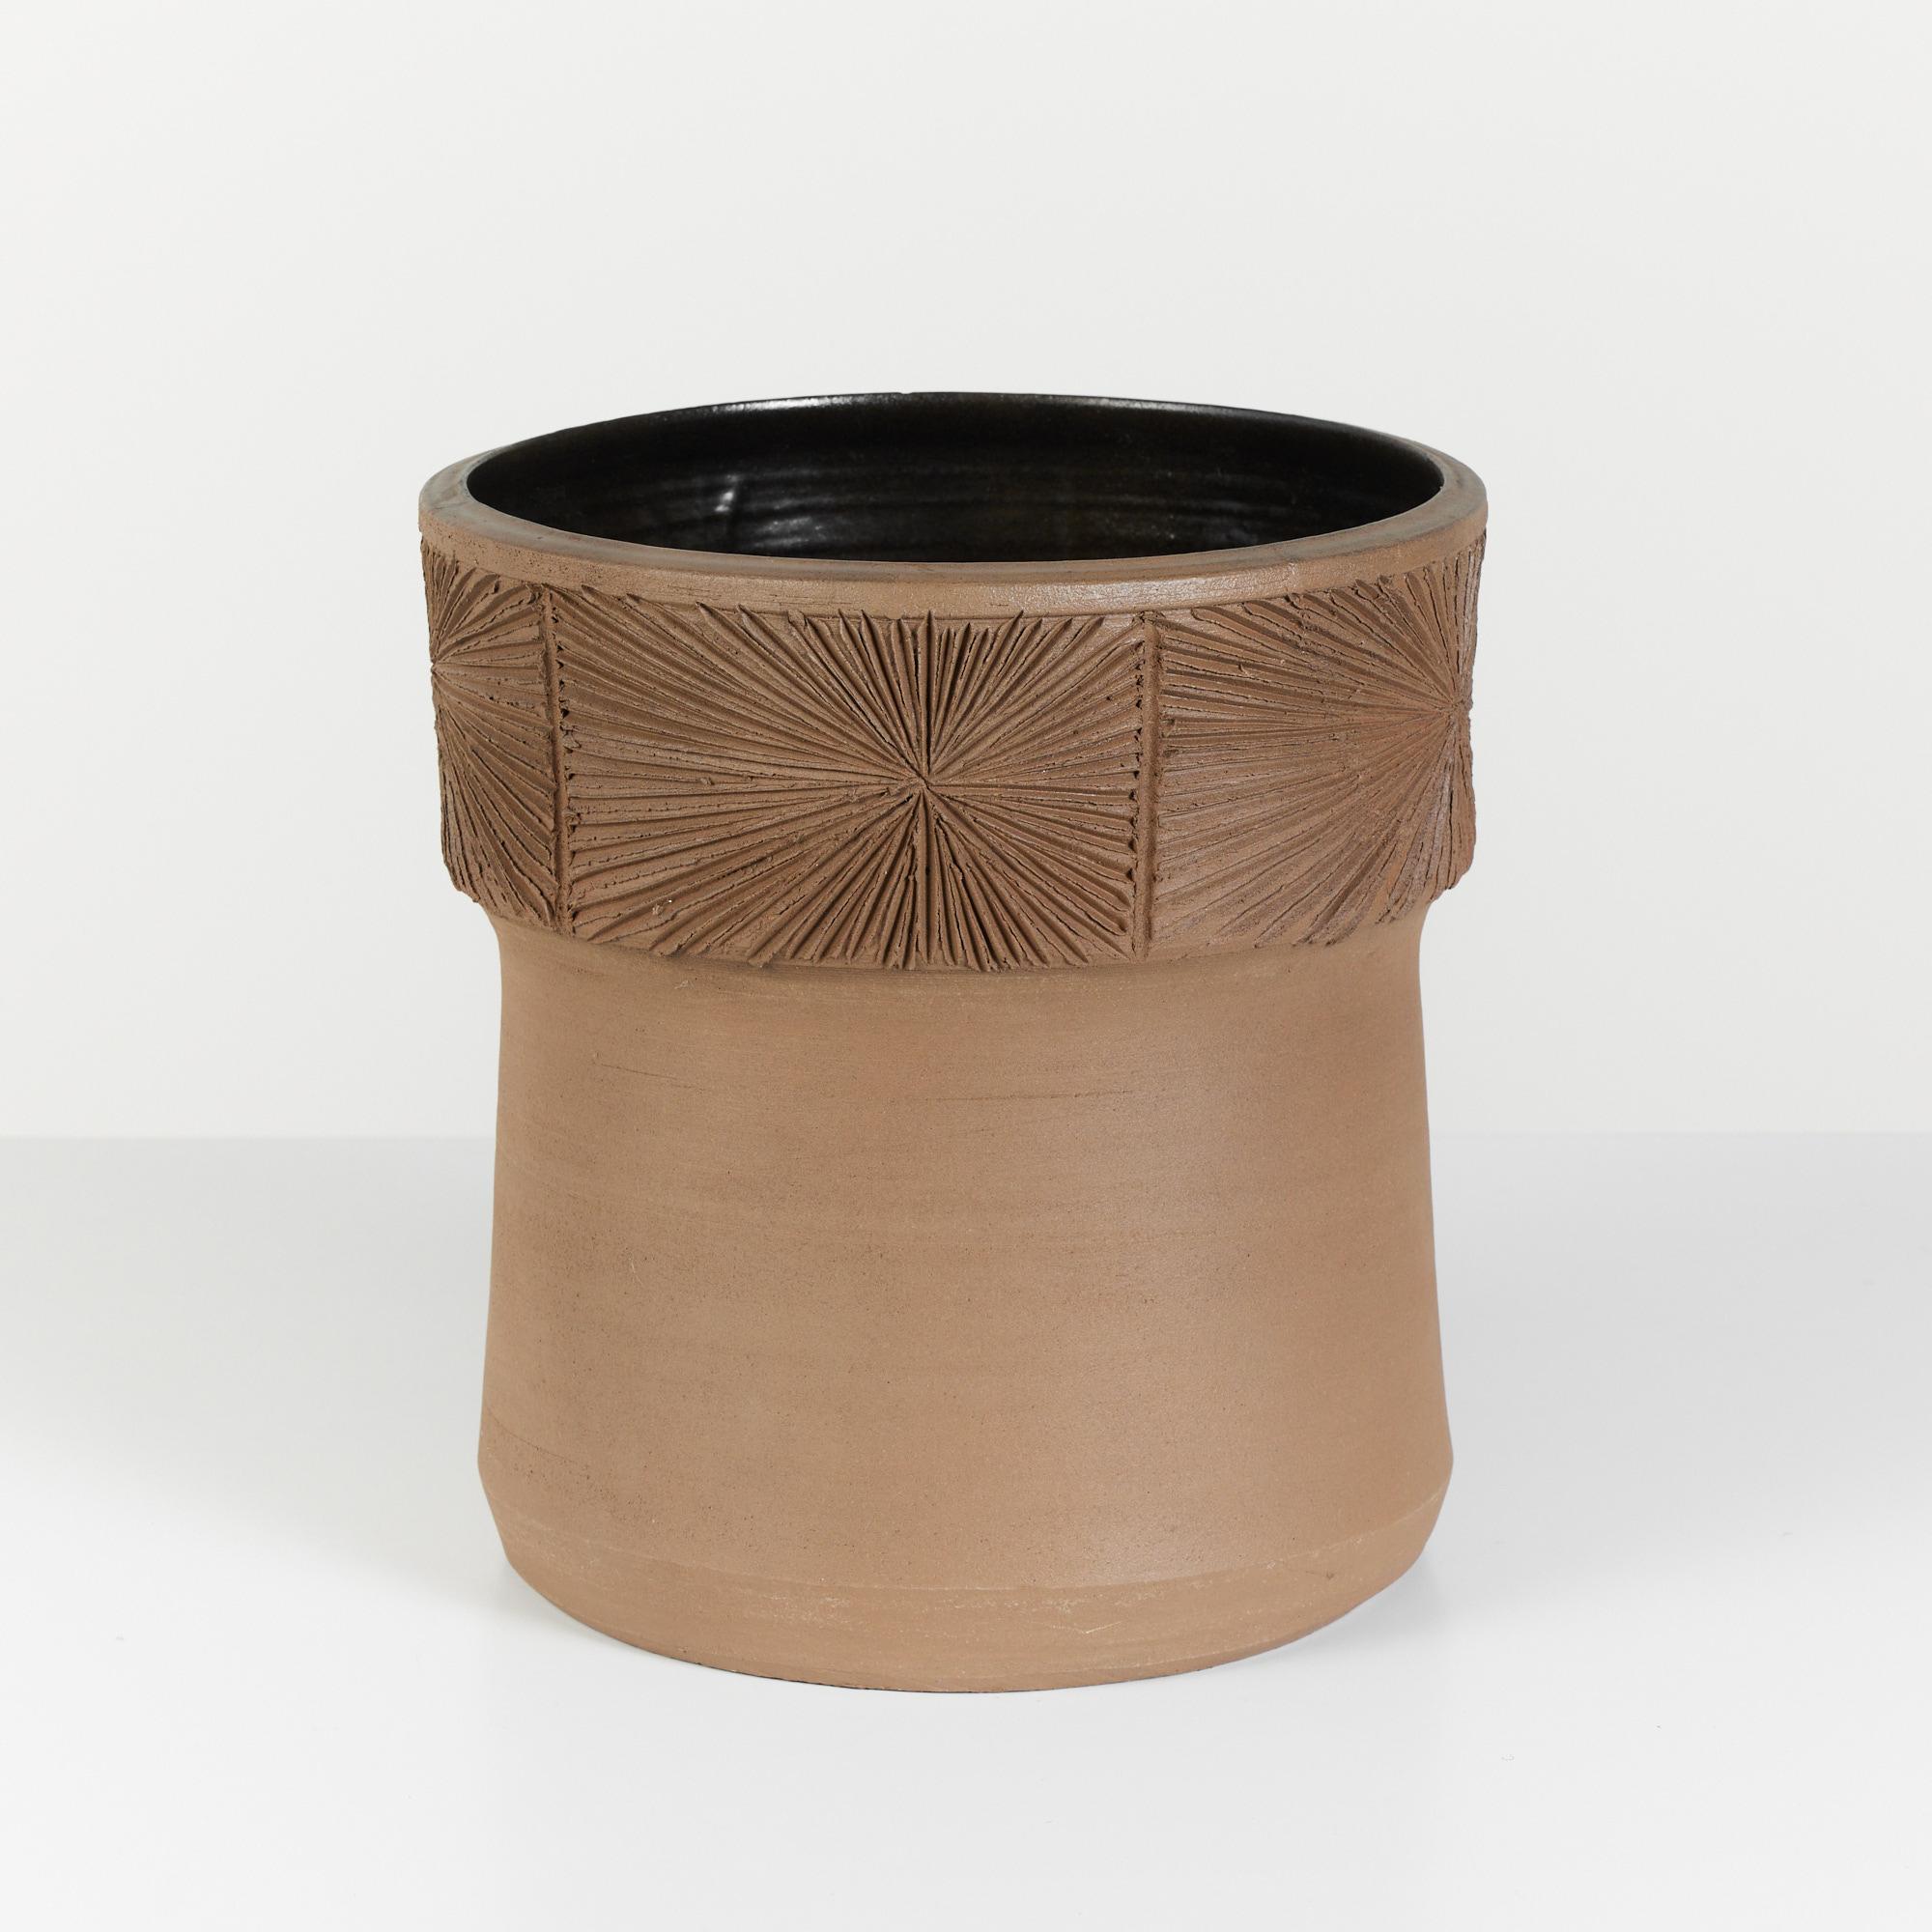 This stoneware planter, circa 1970s, USA, is a result of the collaboration between David Cressey & Robert Maxwell to create the line Earthgender. This hand thrown planter features a hand incised 